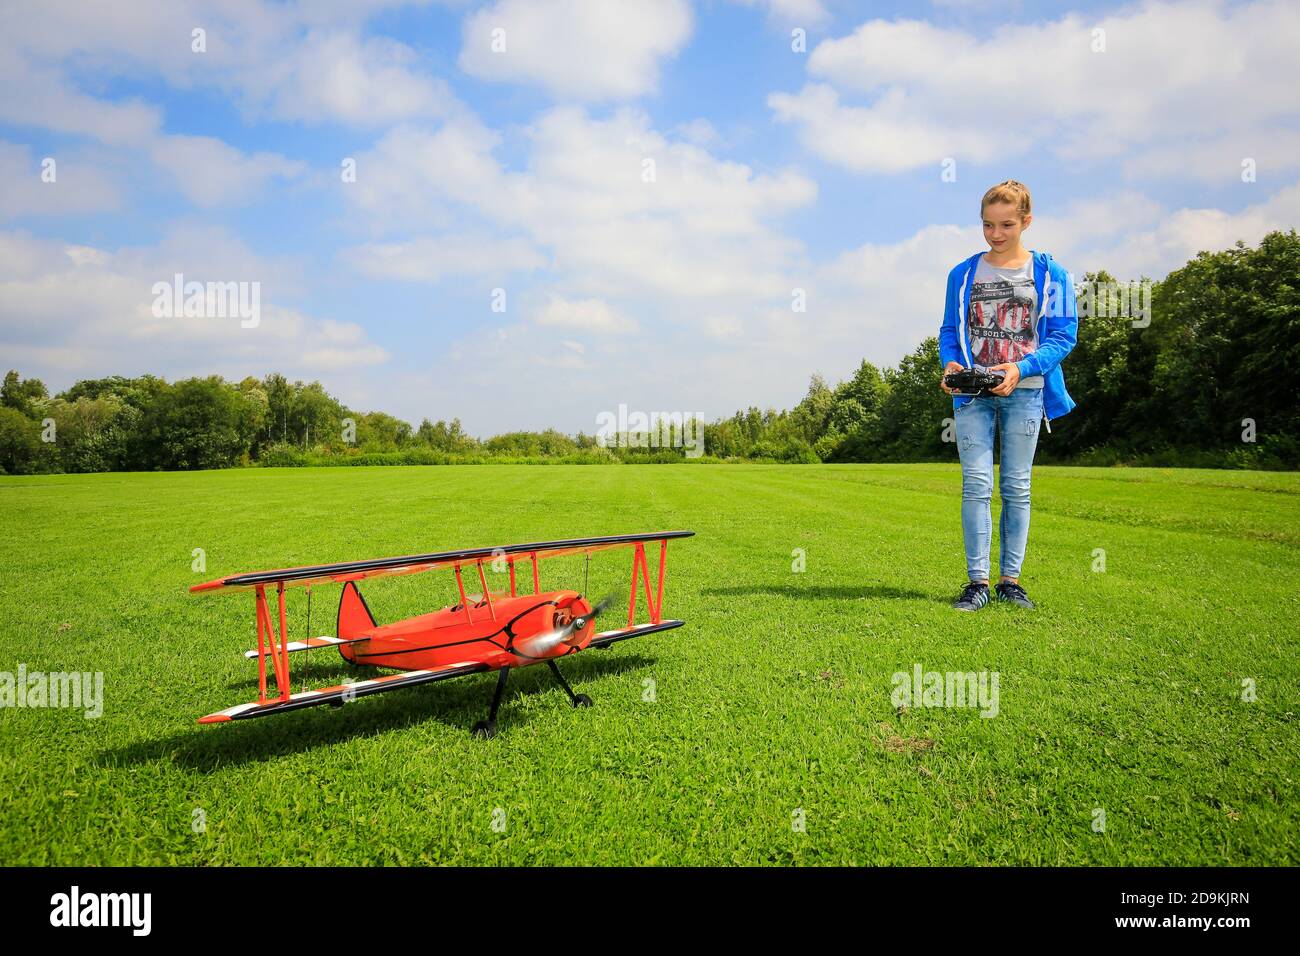 Essen, North Rhine-Westphalia, Ruhr Area, Germany, the Hallopark in the north of Essen is one of the oldest green areas in Essen, Flugmodell-Sport-Club Essen am Hallopark, girls taking flight lessons, here on the occasion of the Essen 2017 Green Capital of Europe. Stock Photo